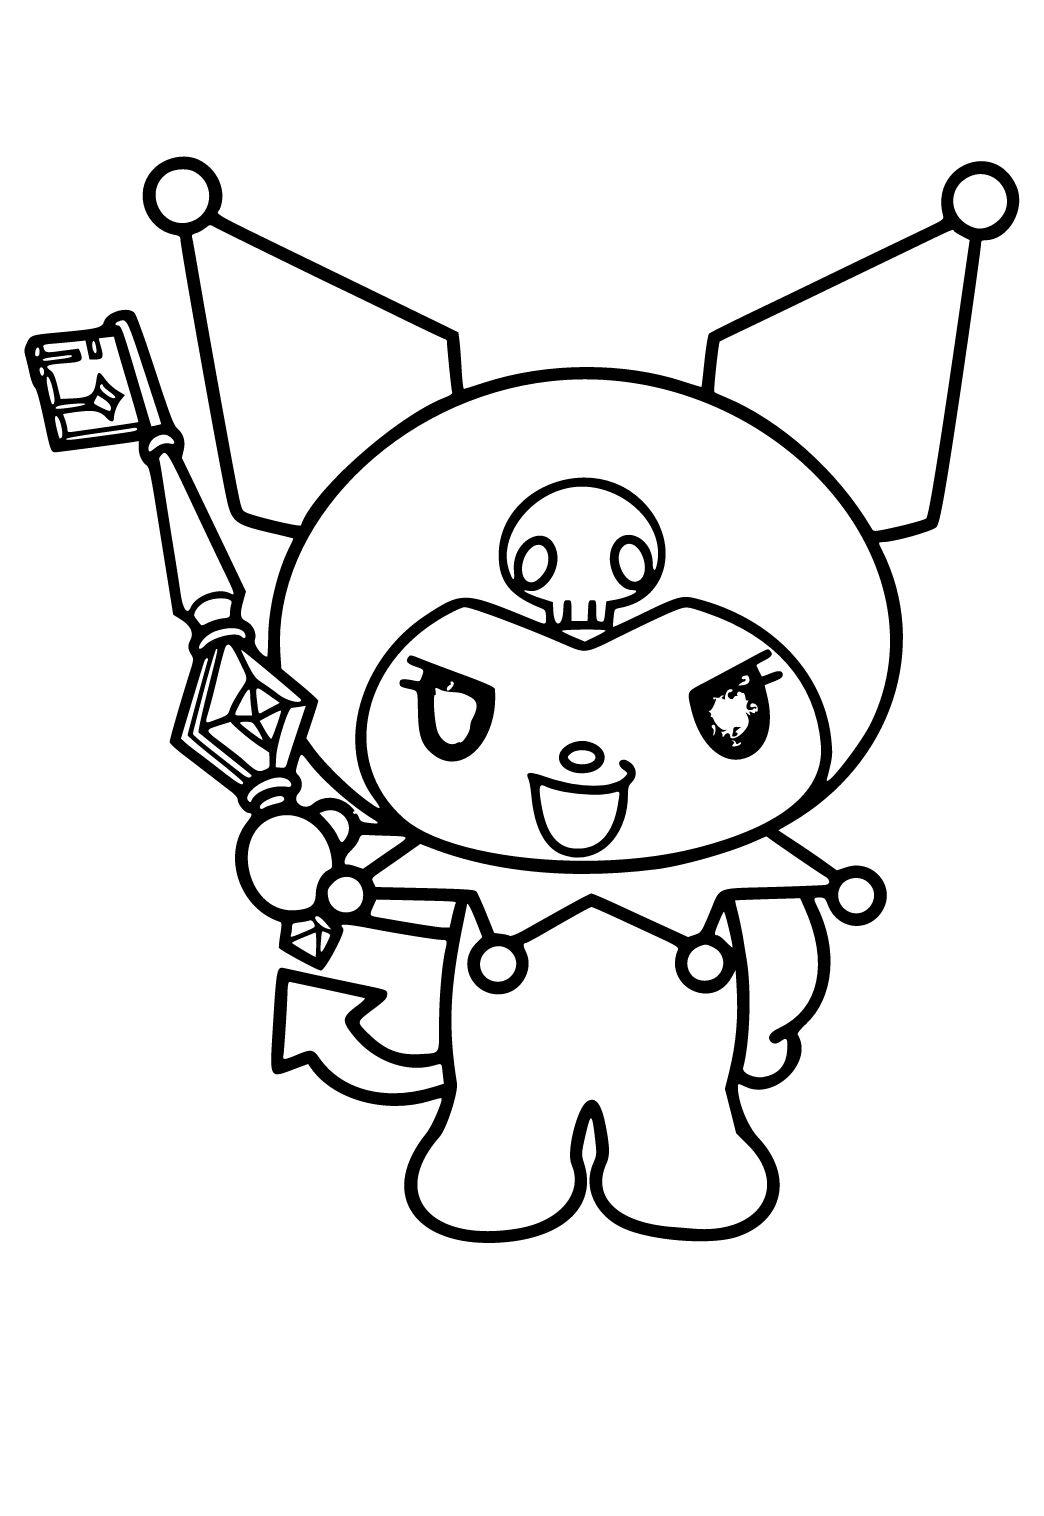 Free Printable My Melody Key Coloring Page for Adults and Kids - Lystok.com